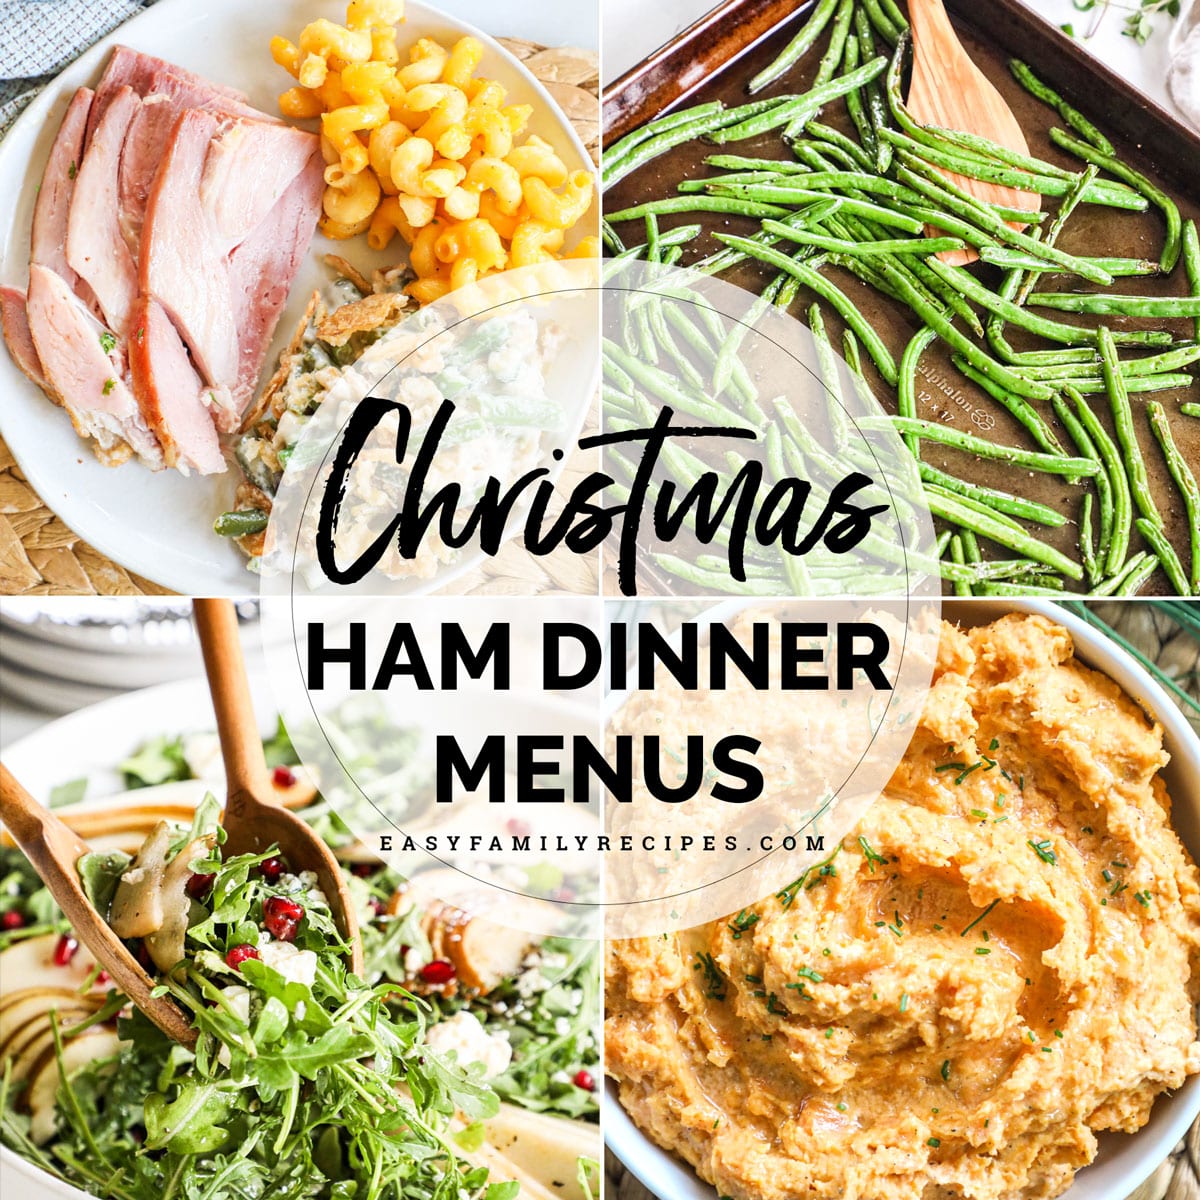 What to serve with ham for Christmas Dinner